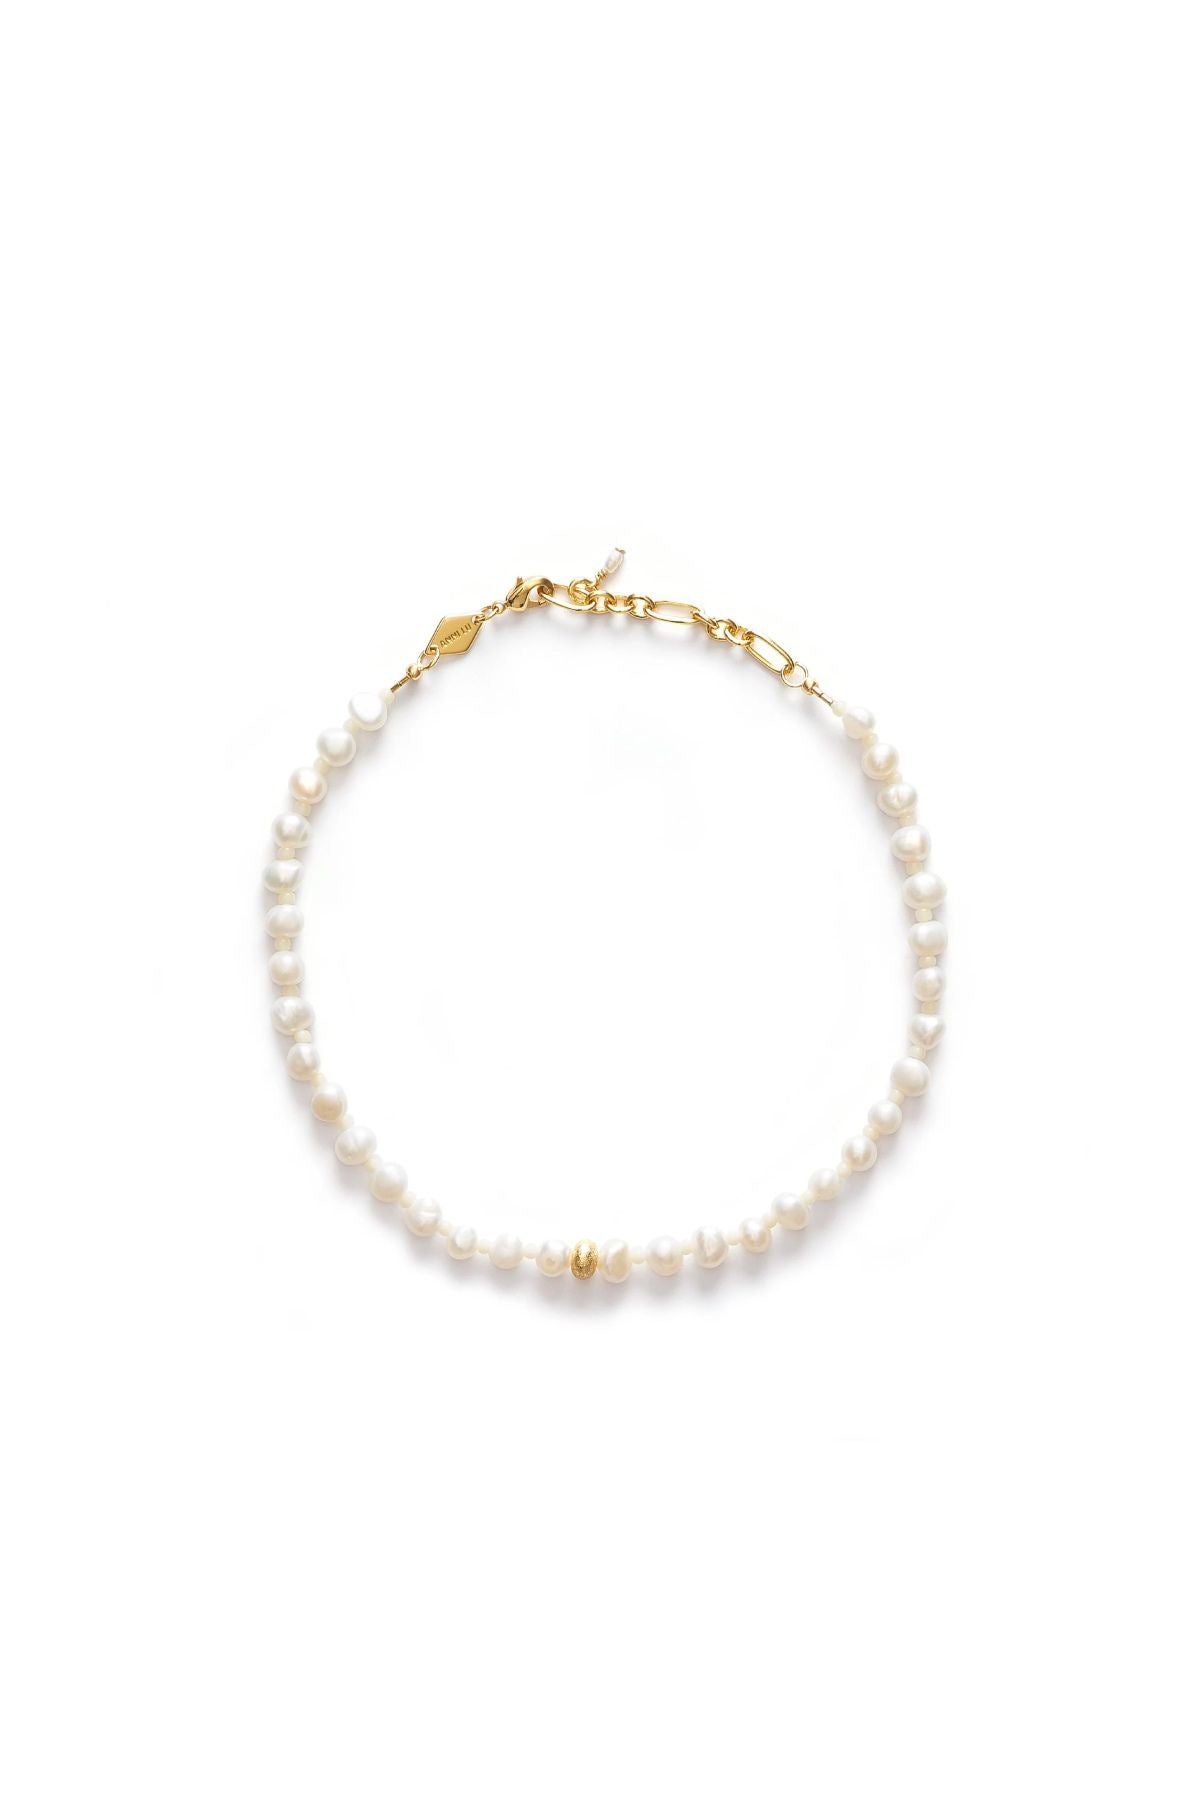 Anni Lu Stellar Pearly Anklet - Gold